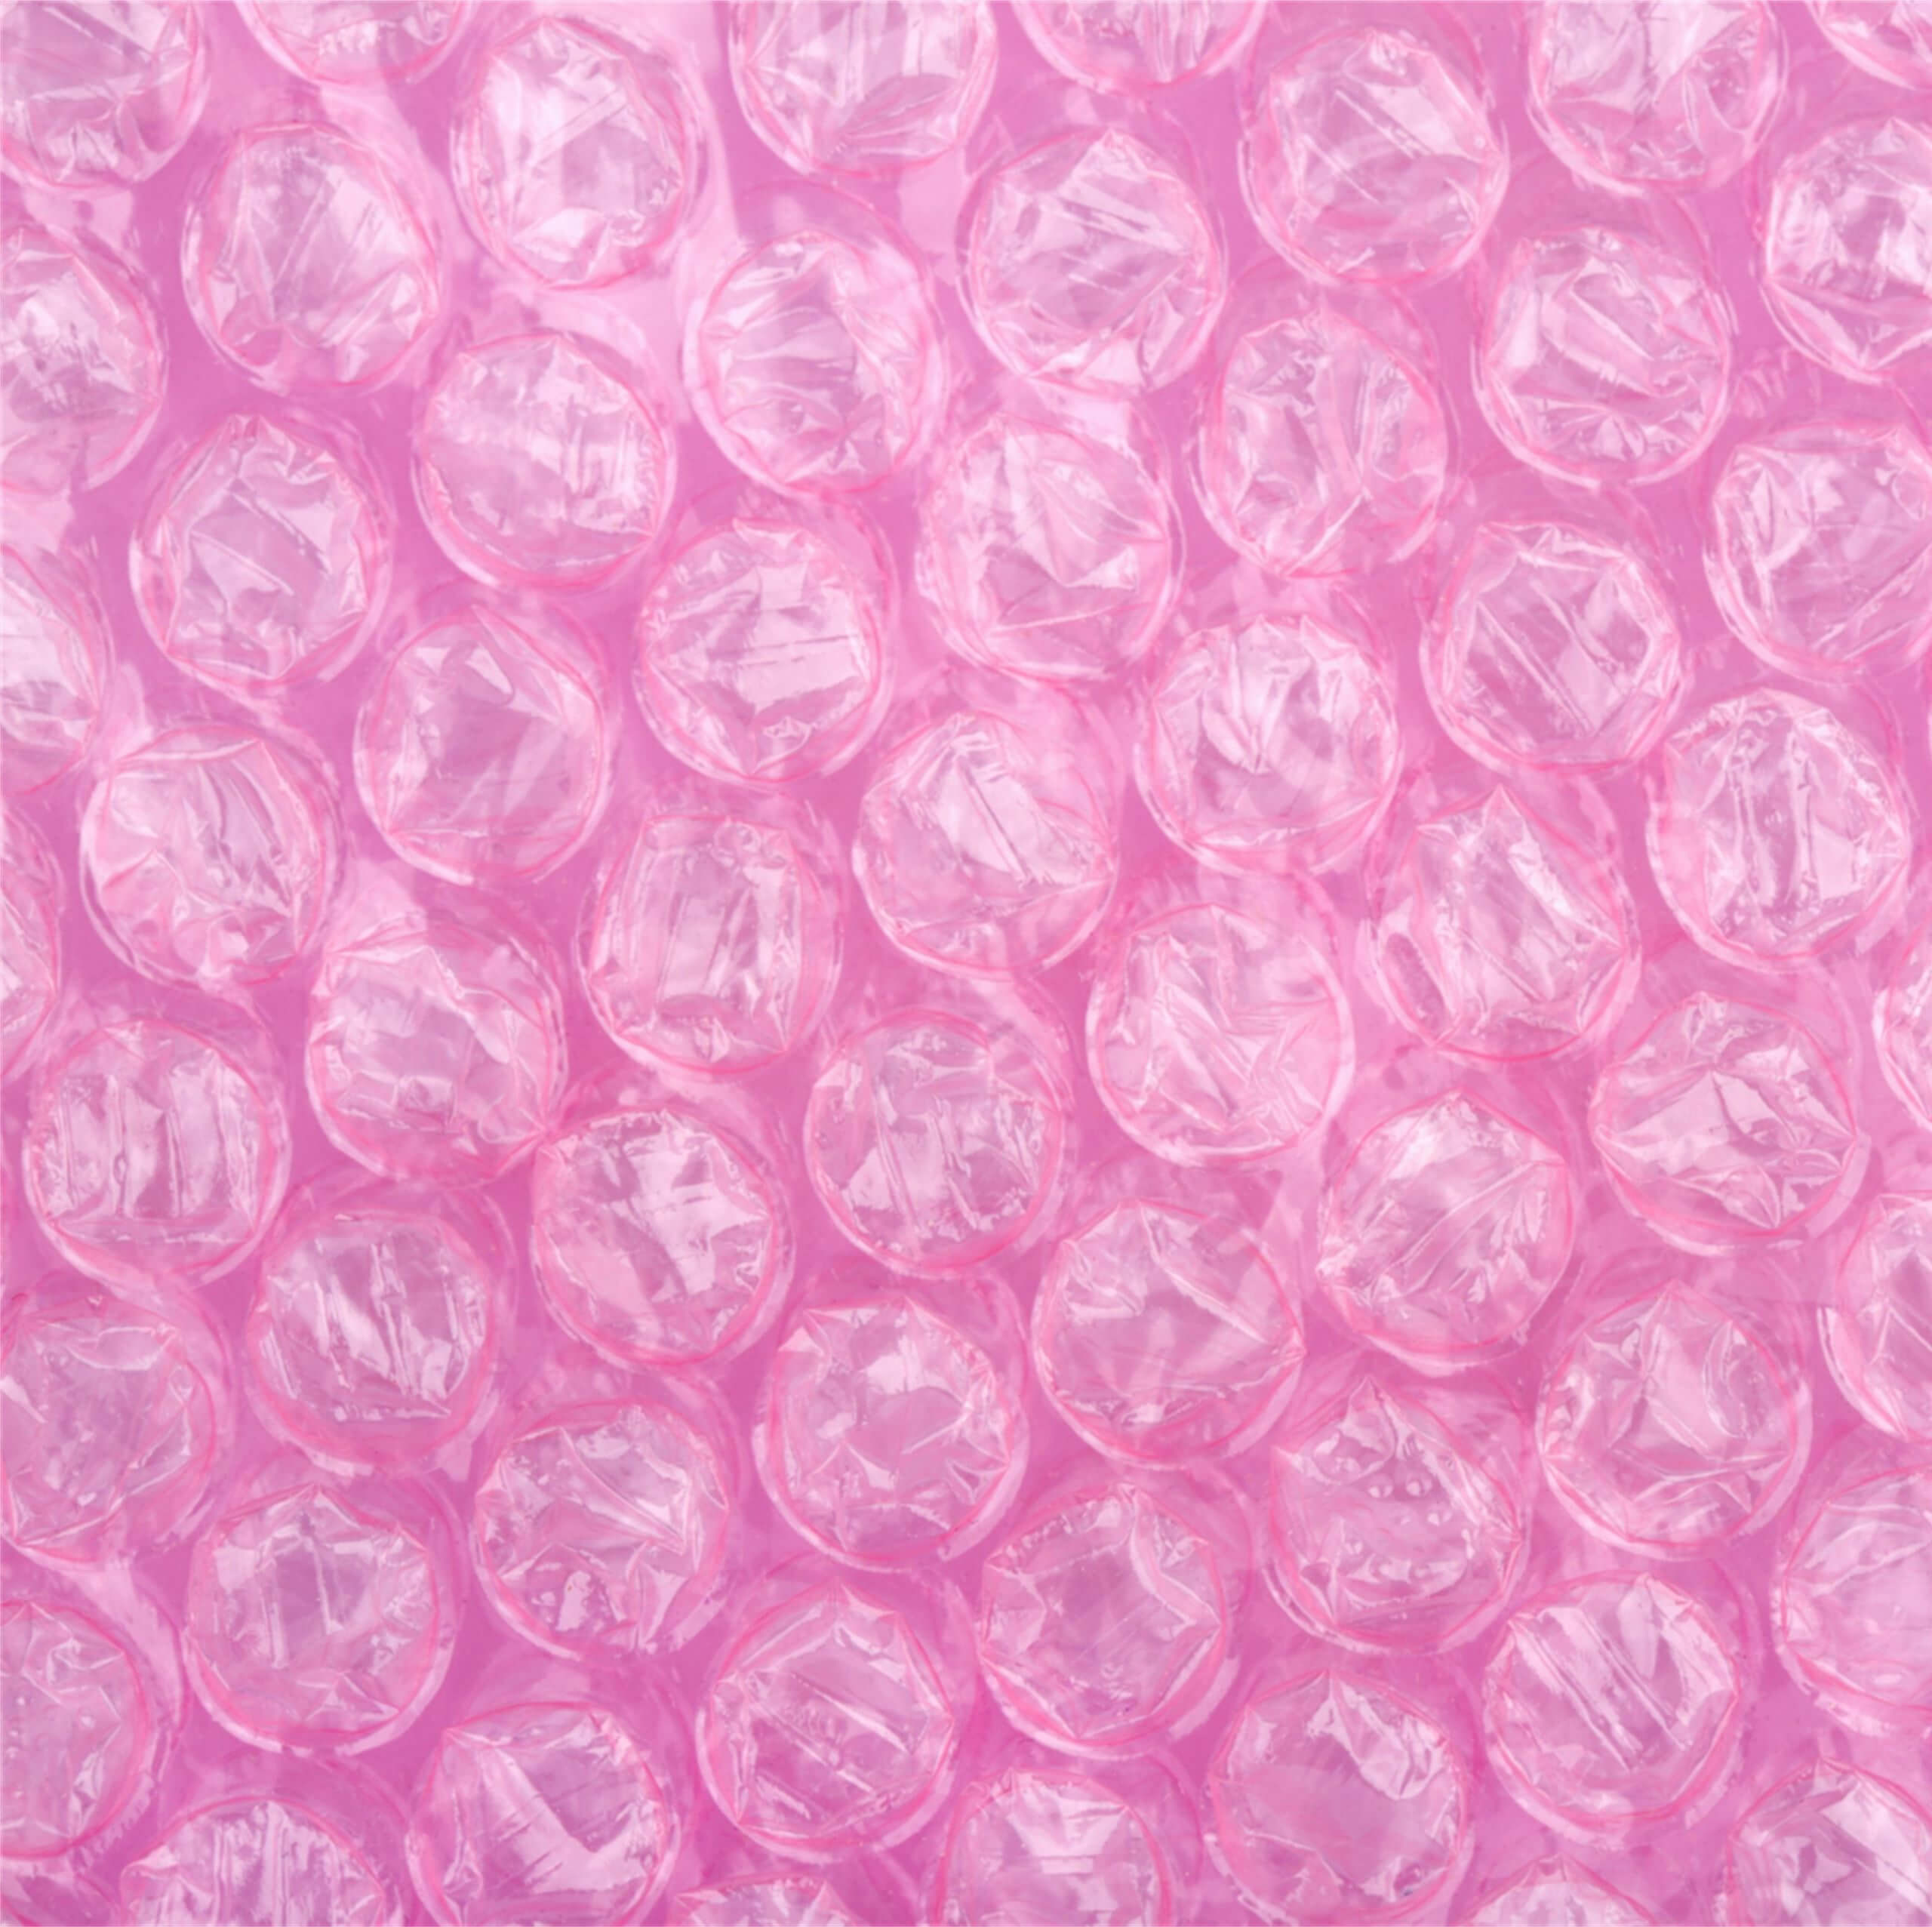 A close up image of our Bubble Wrap (Anti Static).